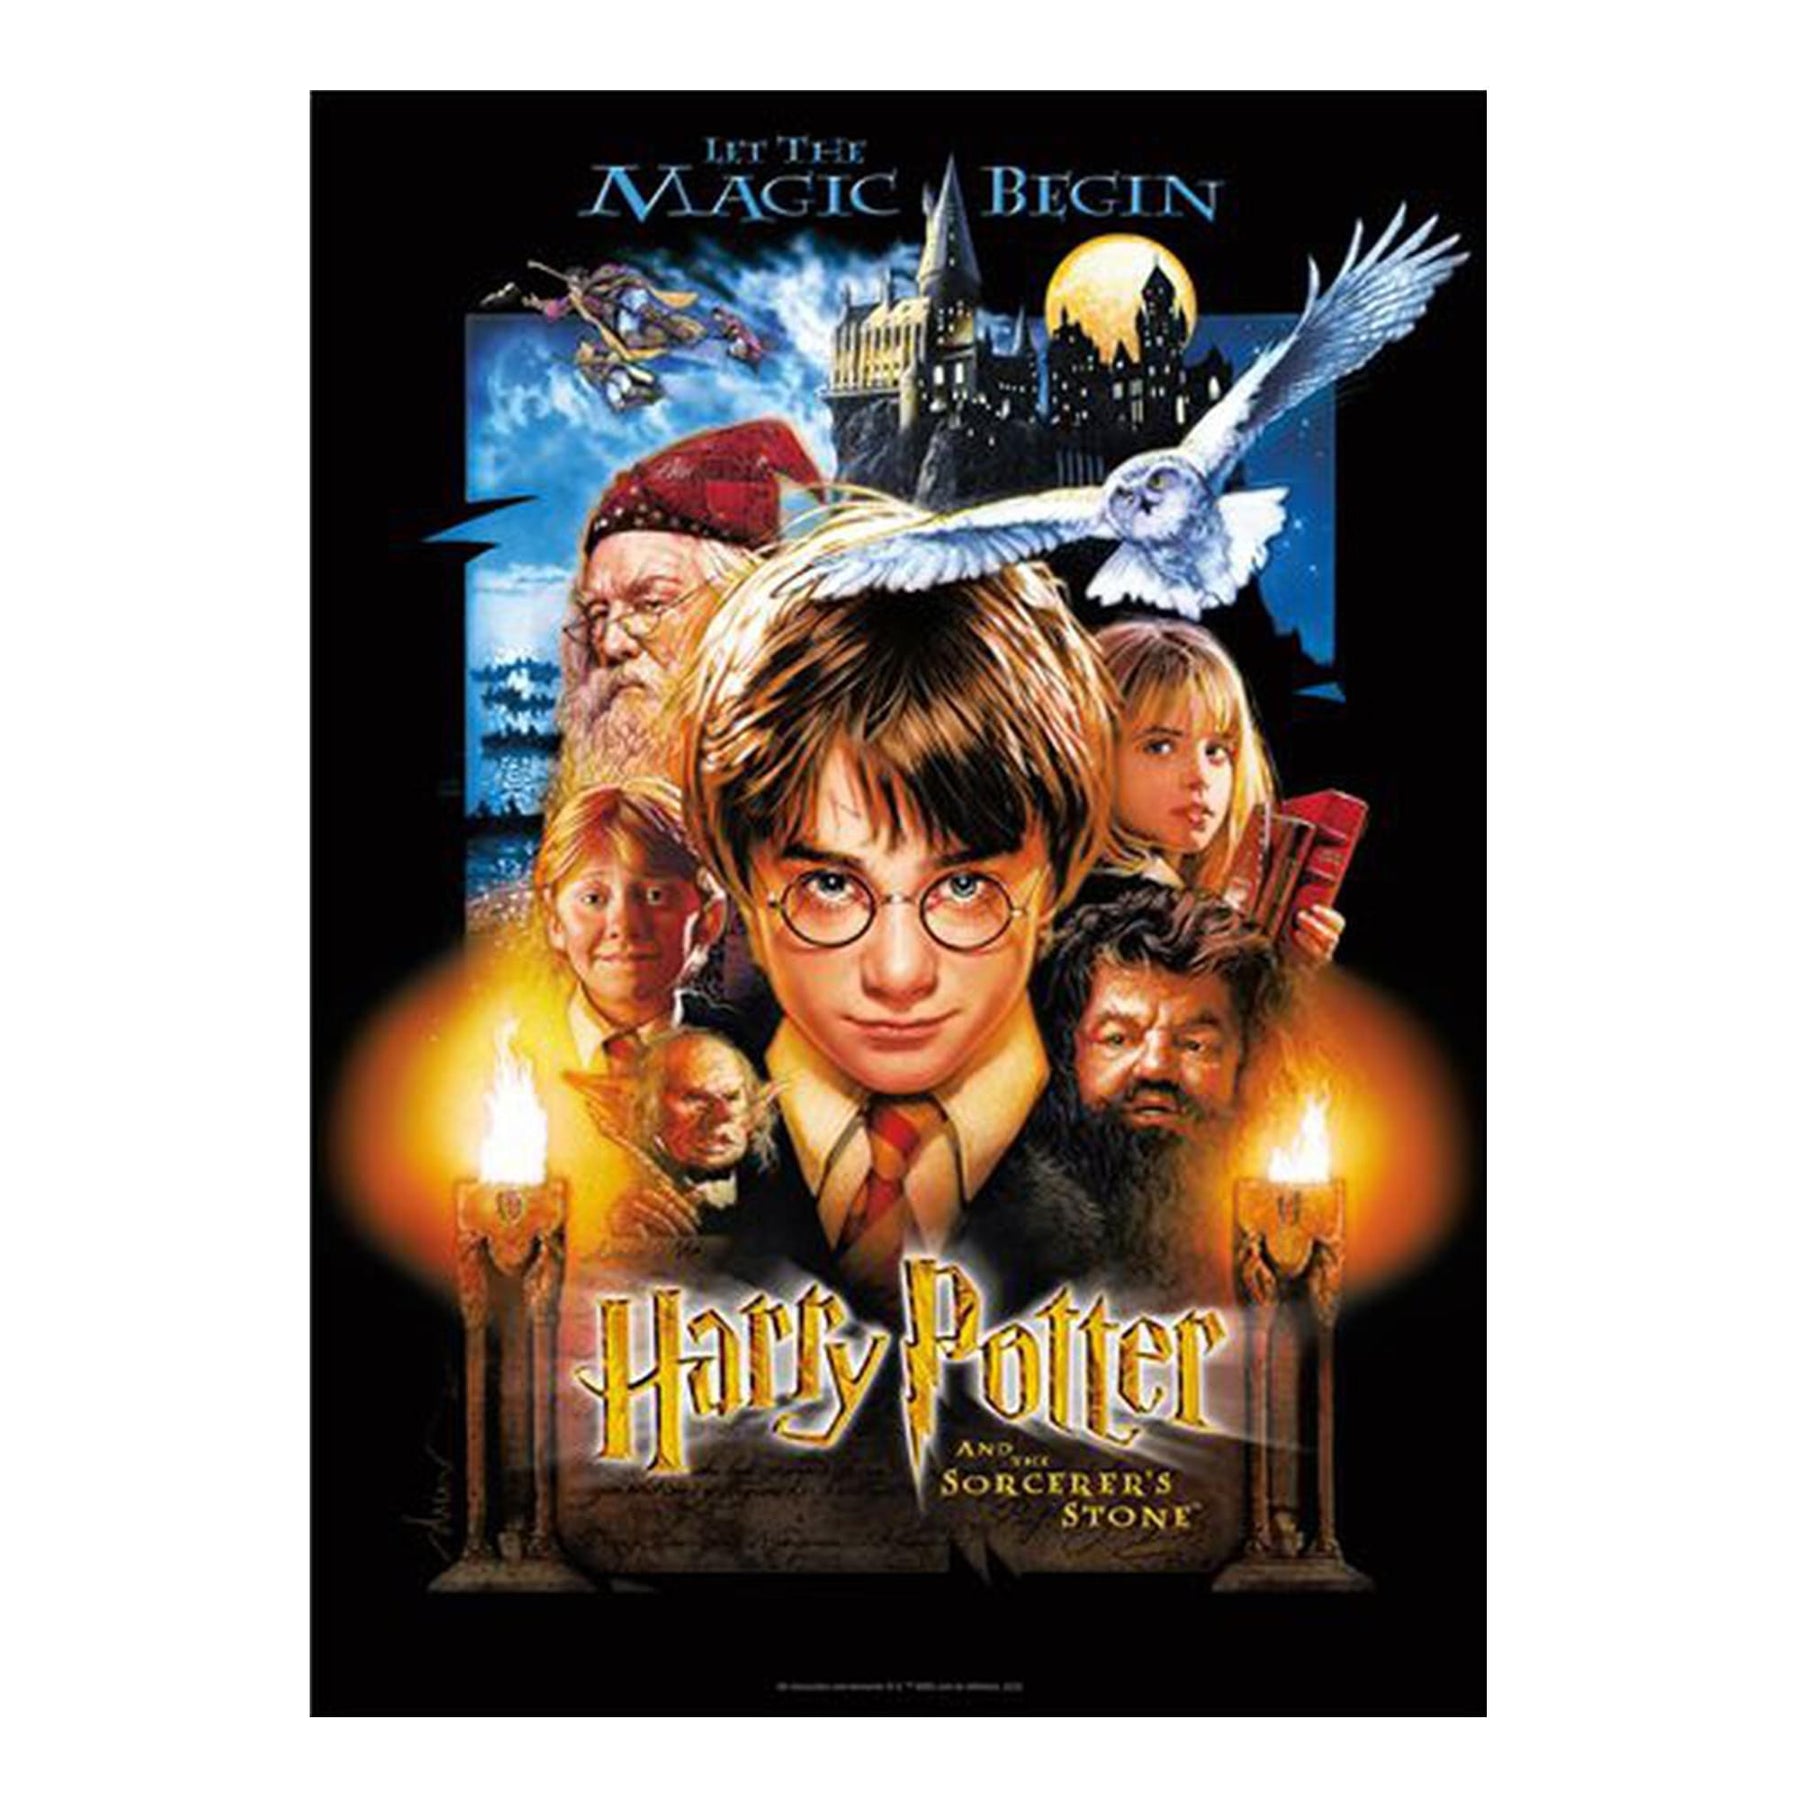 Harry Potter and The Sorcerer's Stone 300 Piece VHS Jigsaw Puzzle